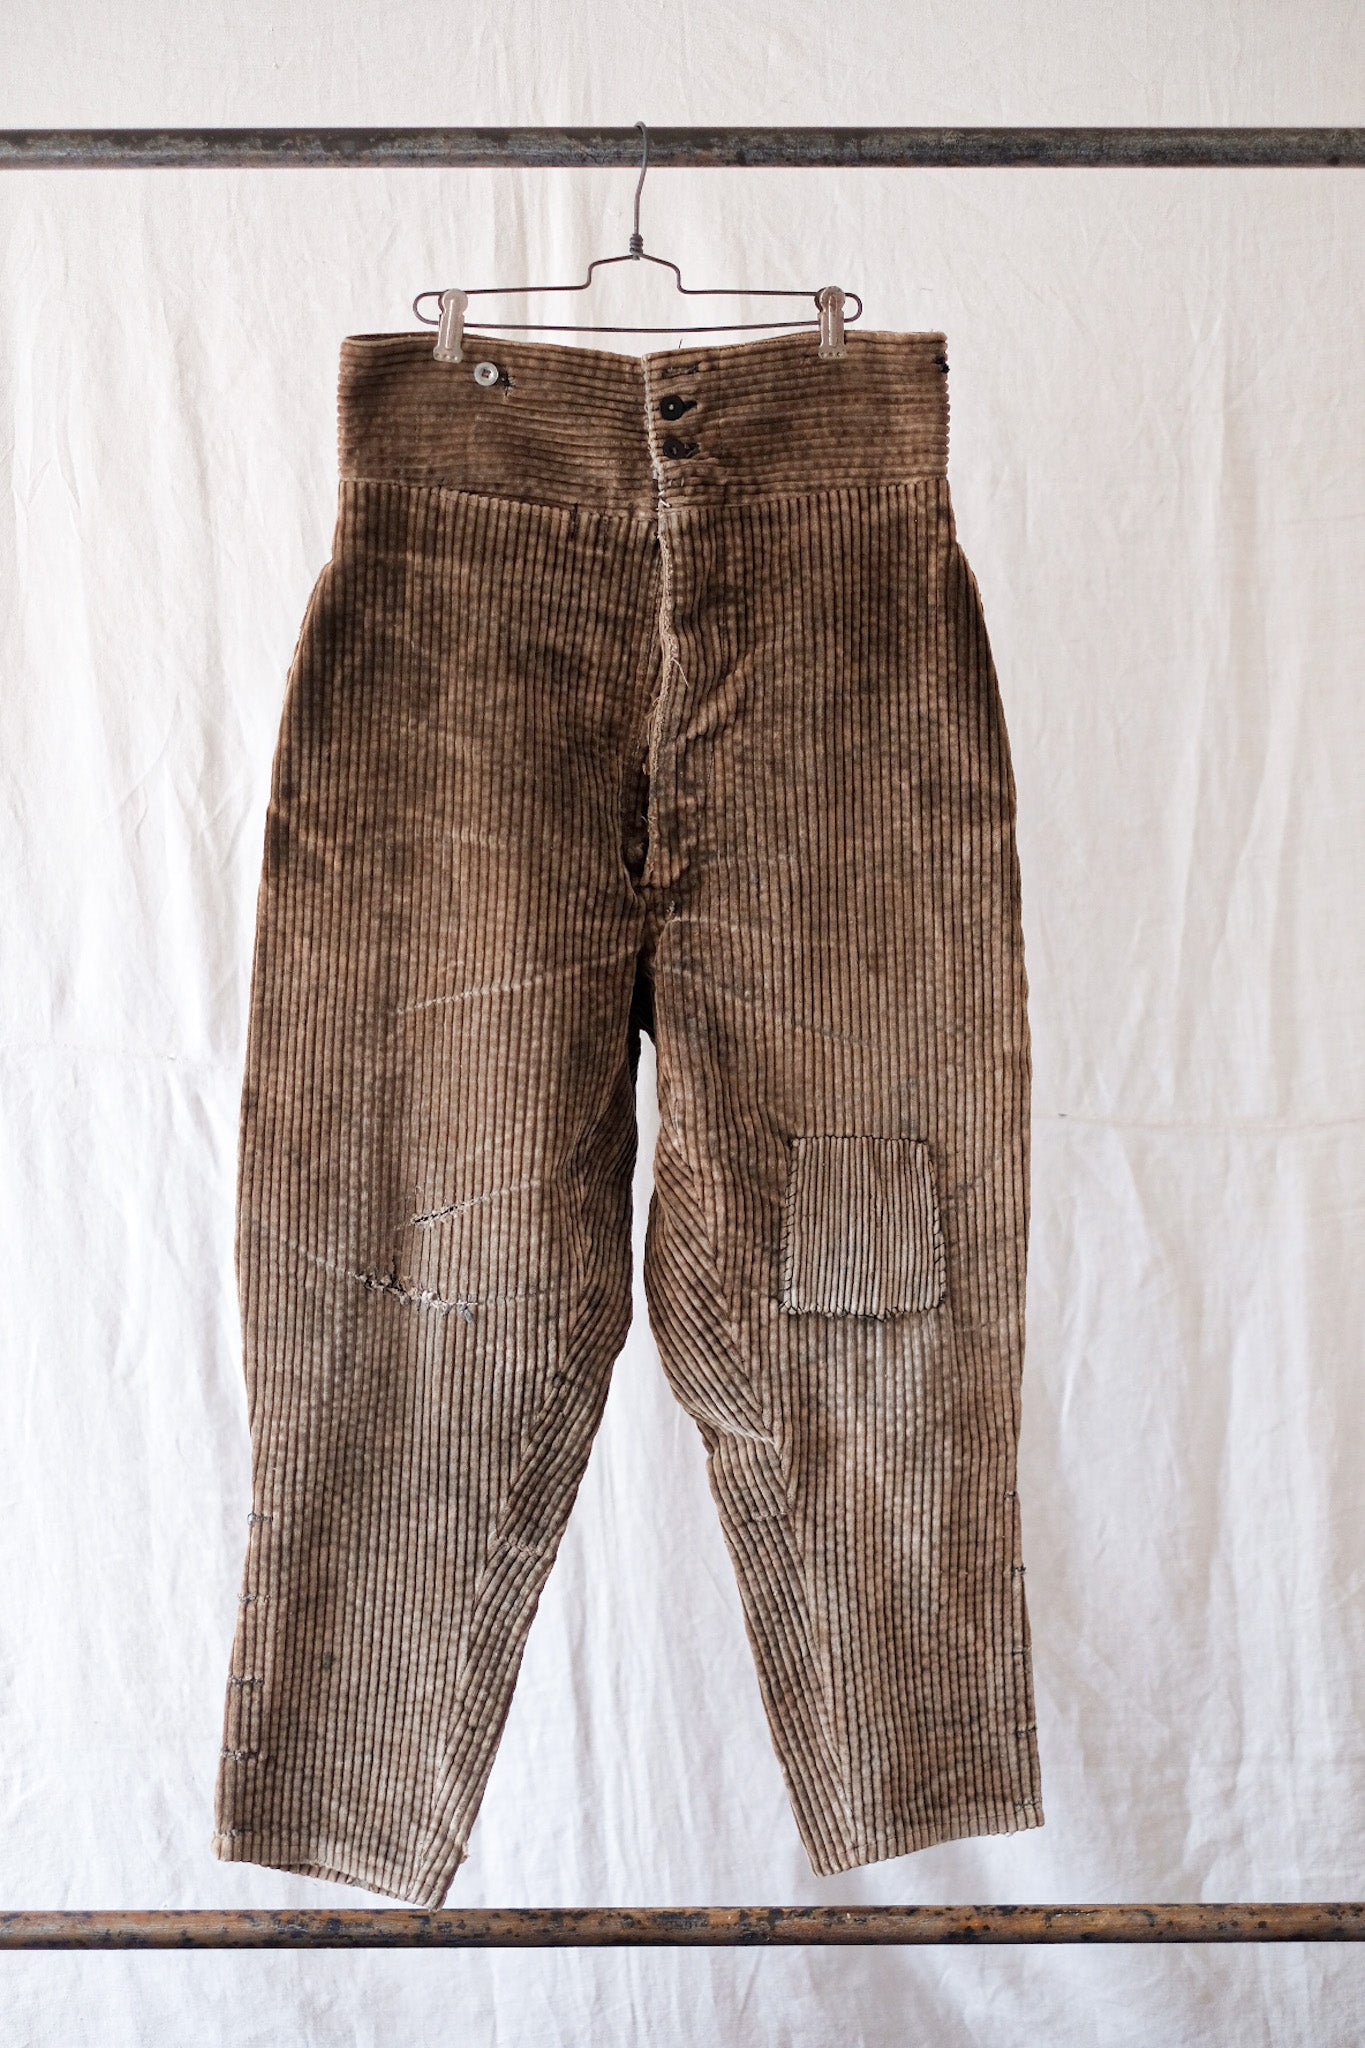 【~30's】French Vintage Brown Corduroy Work Pants "Adolphe Lafont"